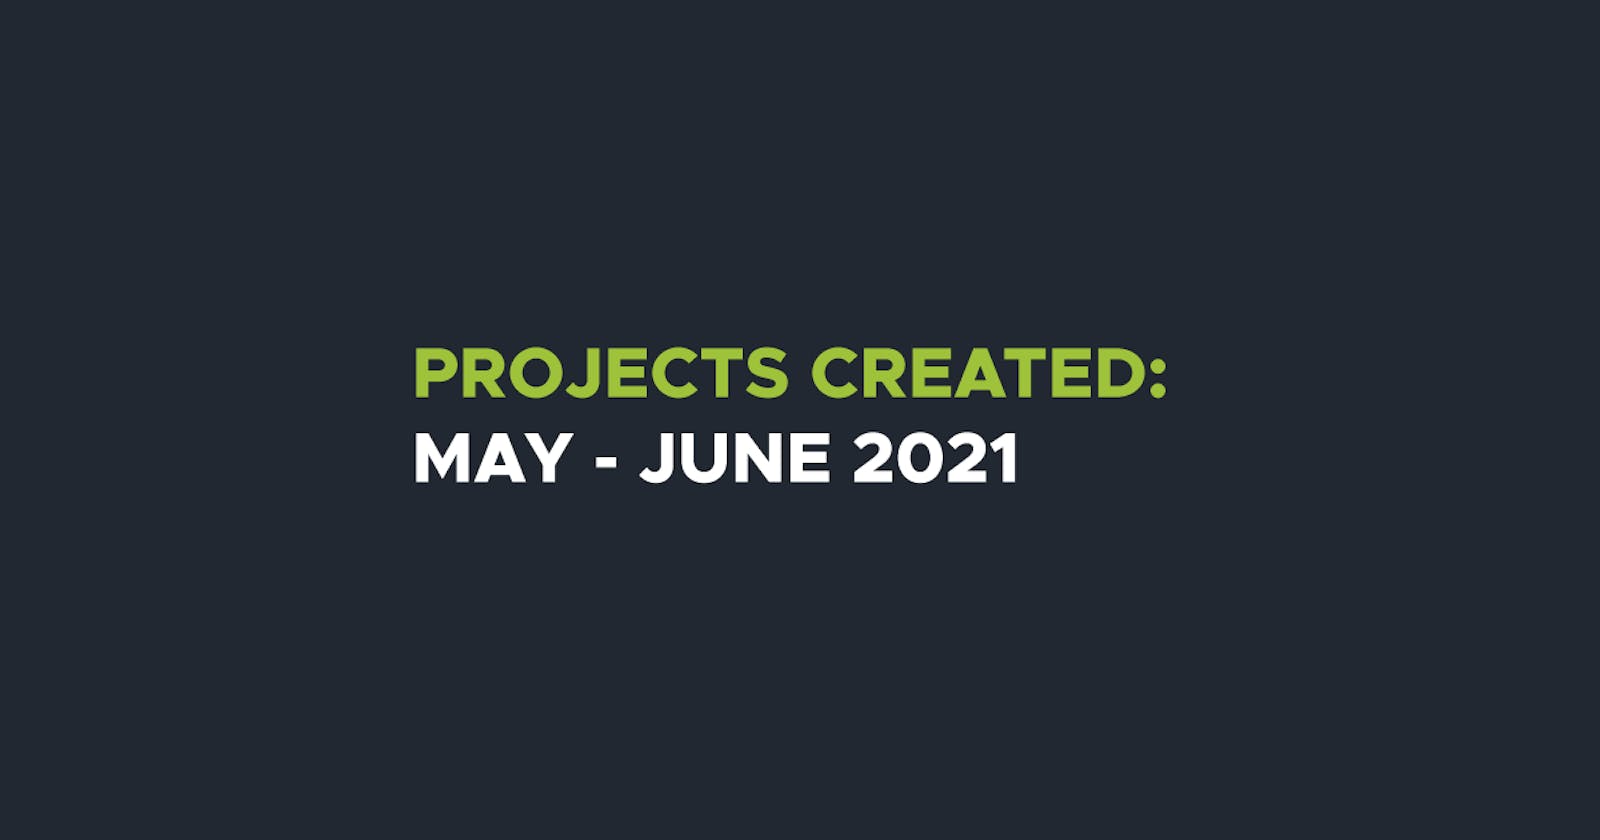 Projects Created: May - June 2021